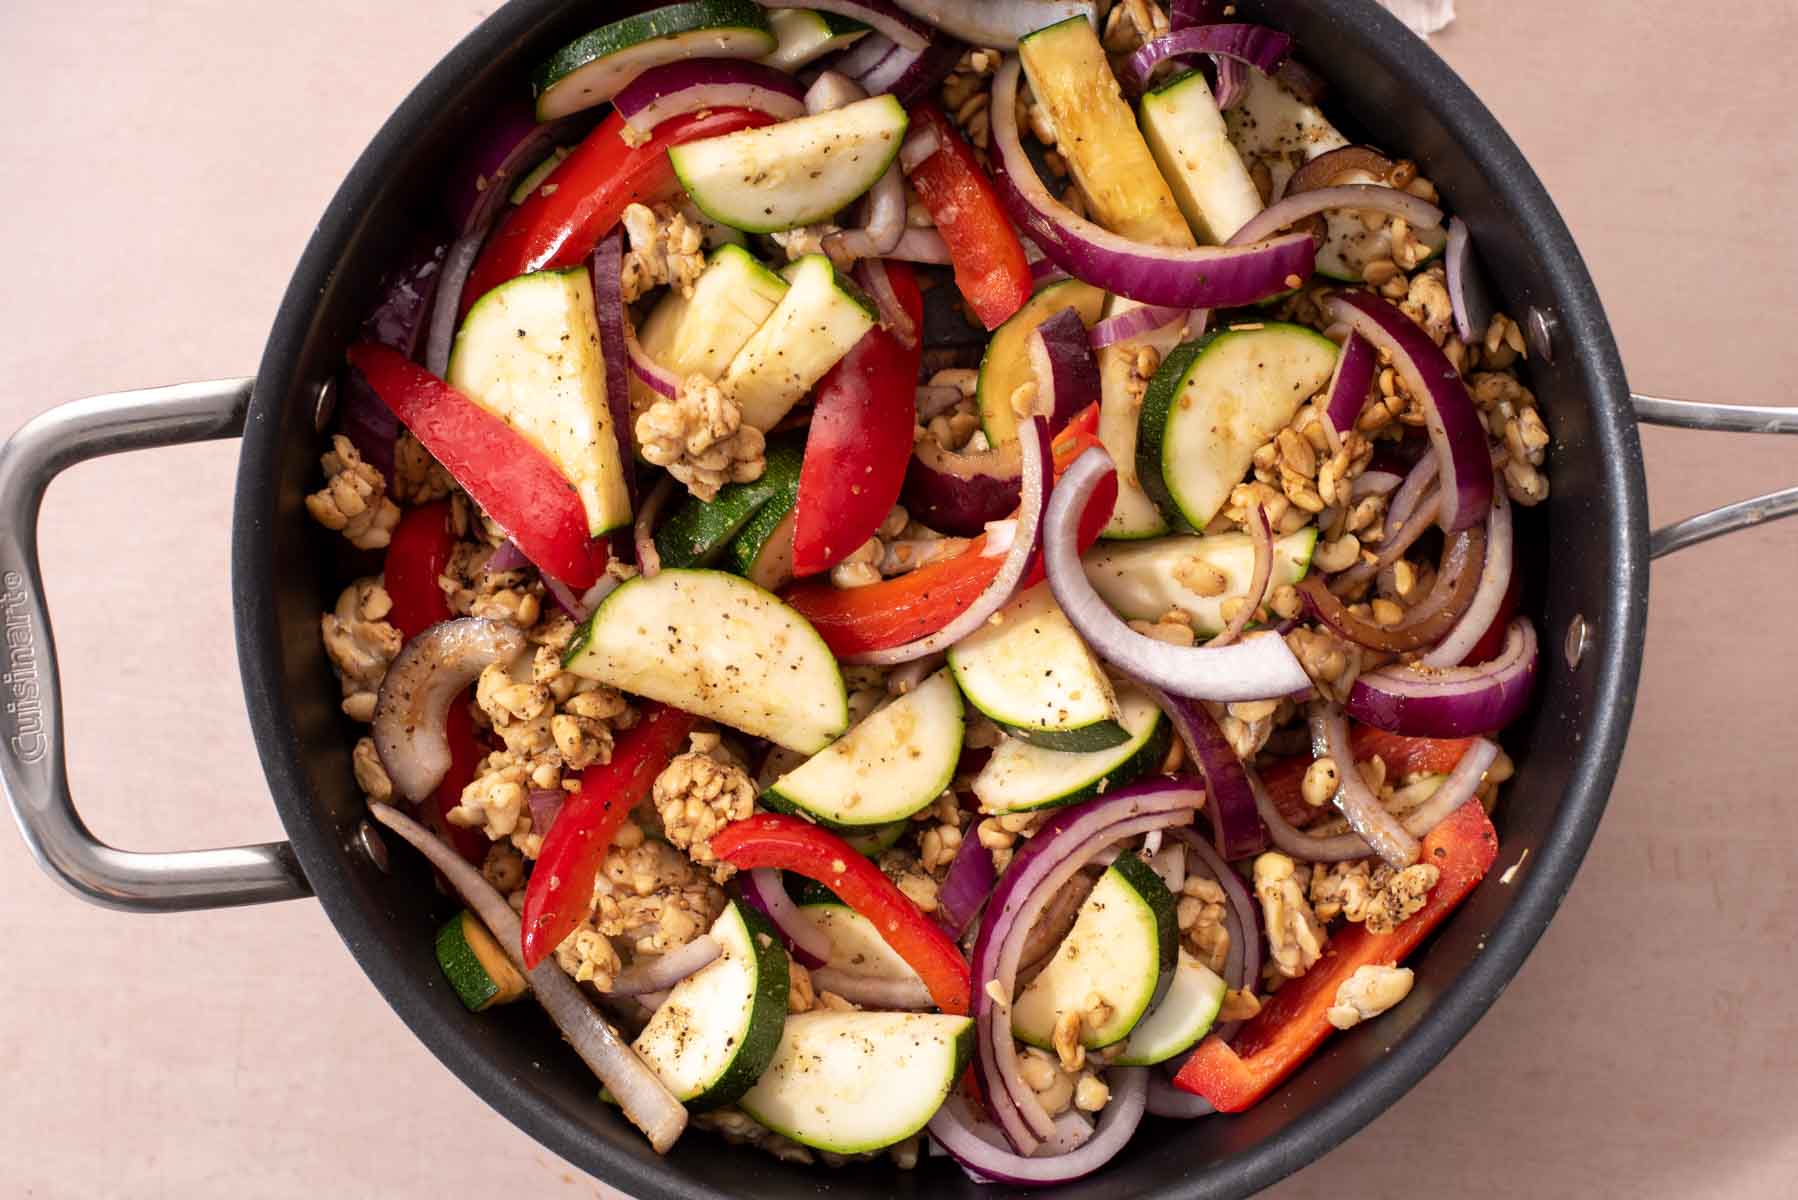 Vegetables and tempeh in a black pan before cooking.